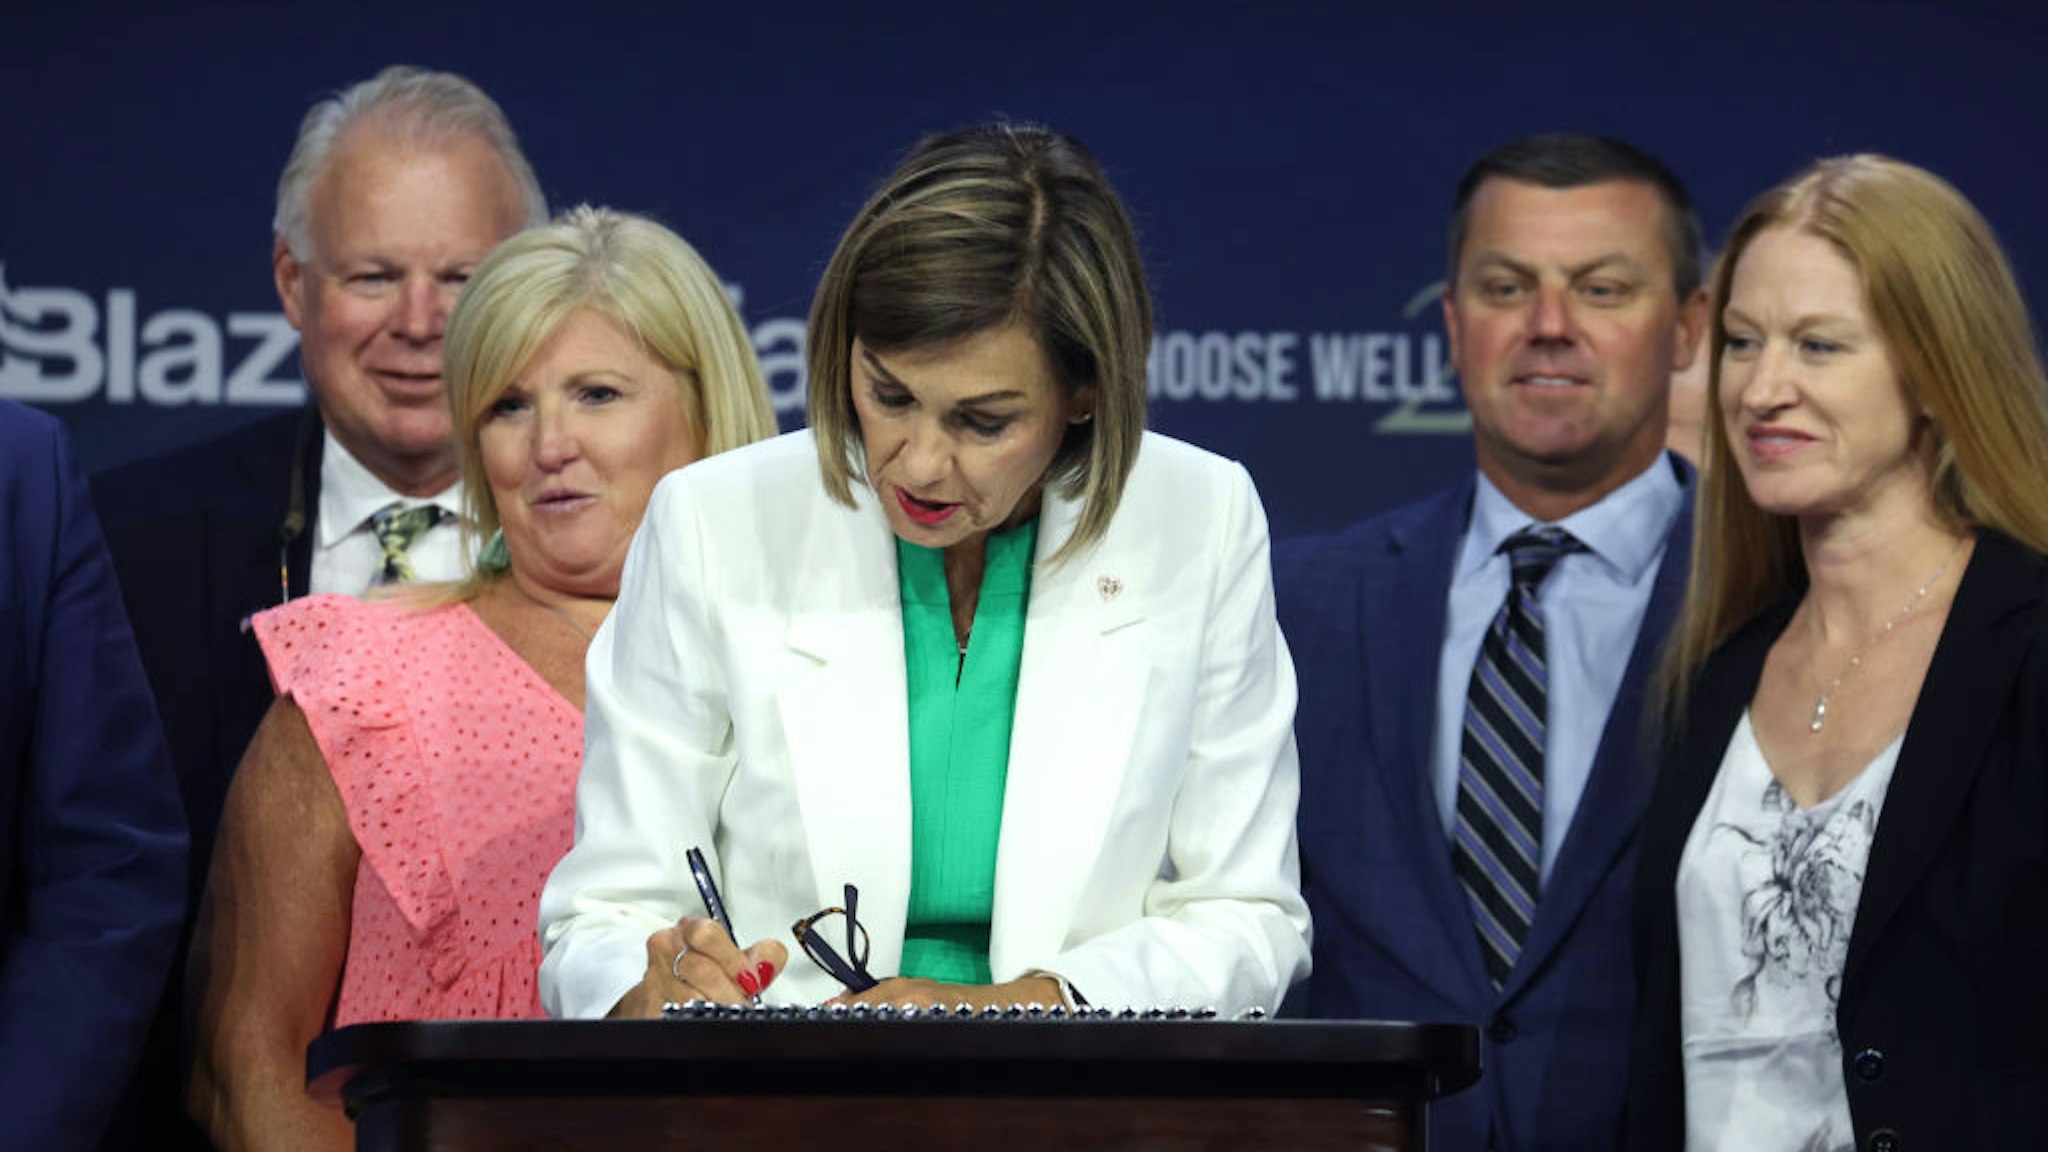 DES MOINES, IOWA - JULY 14: Iowa Governor Kim Reynolds signs into law a bill that will ban most abortions after around six weeks of pregnancy during a visit to the Family Leadership Summit on July 14, 2023 in Des Moines, Iowa. Several Republican presidential candidates were scheduled to speak at the event, billed as “The Midwest’s largest gathering of Christians seeking cultural transformation in the family, Church, government, and more.” (Photo by Scott Olson/Getty Images)